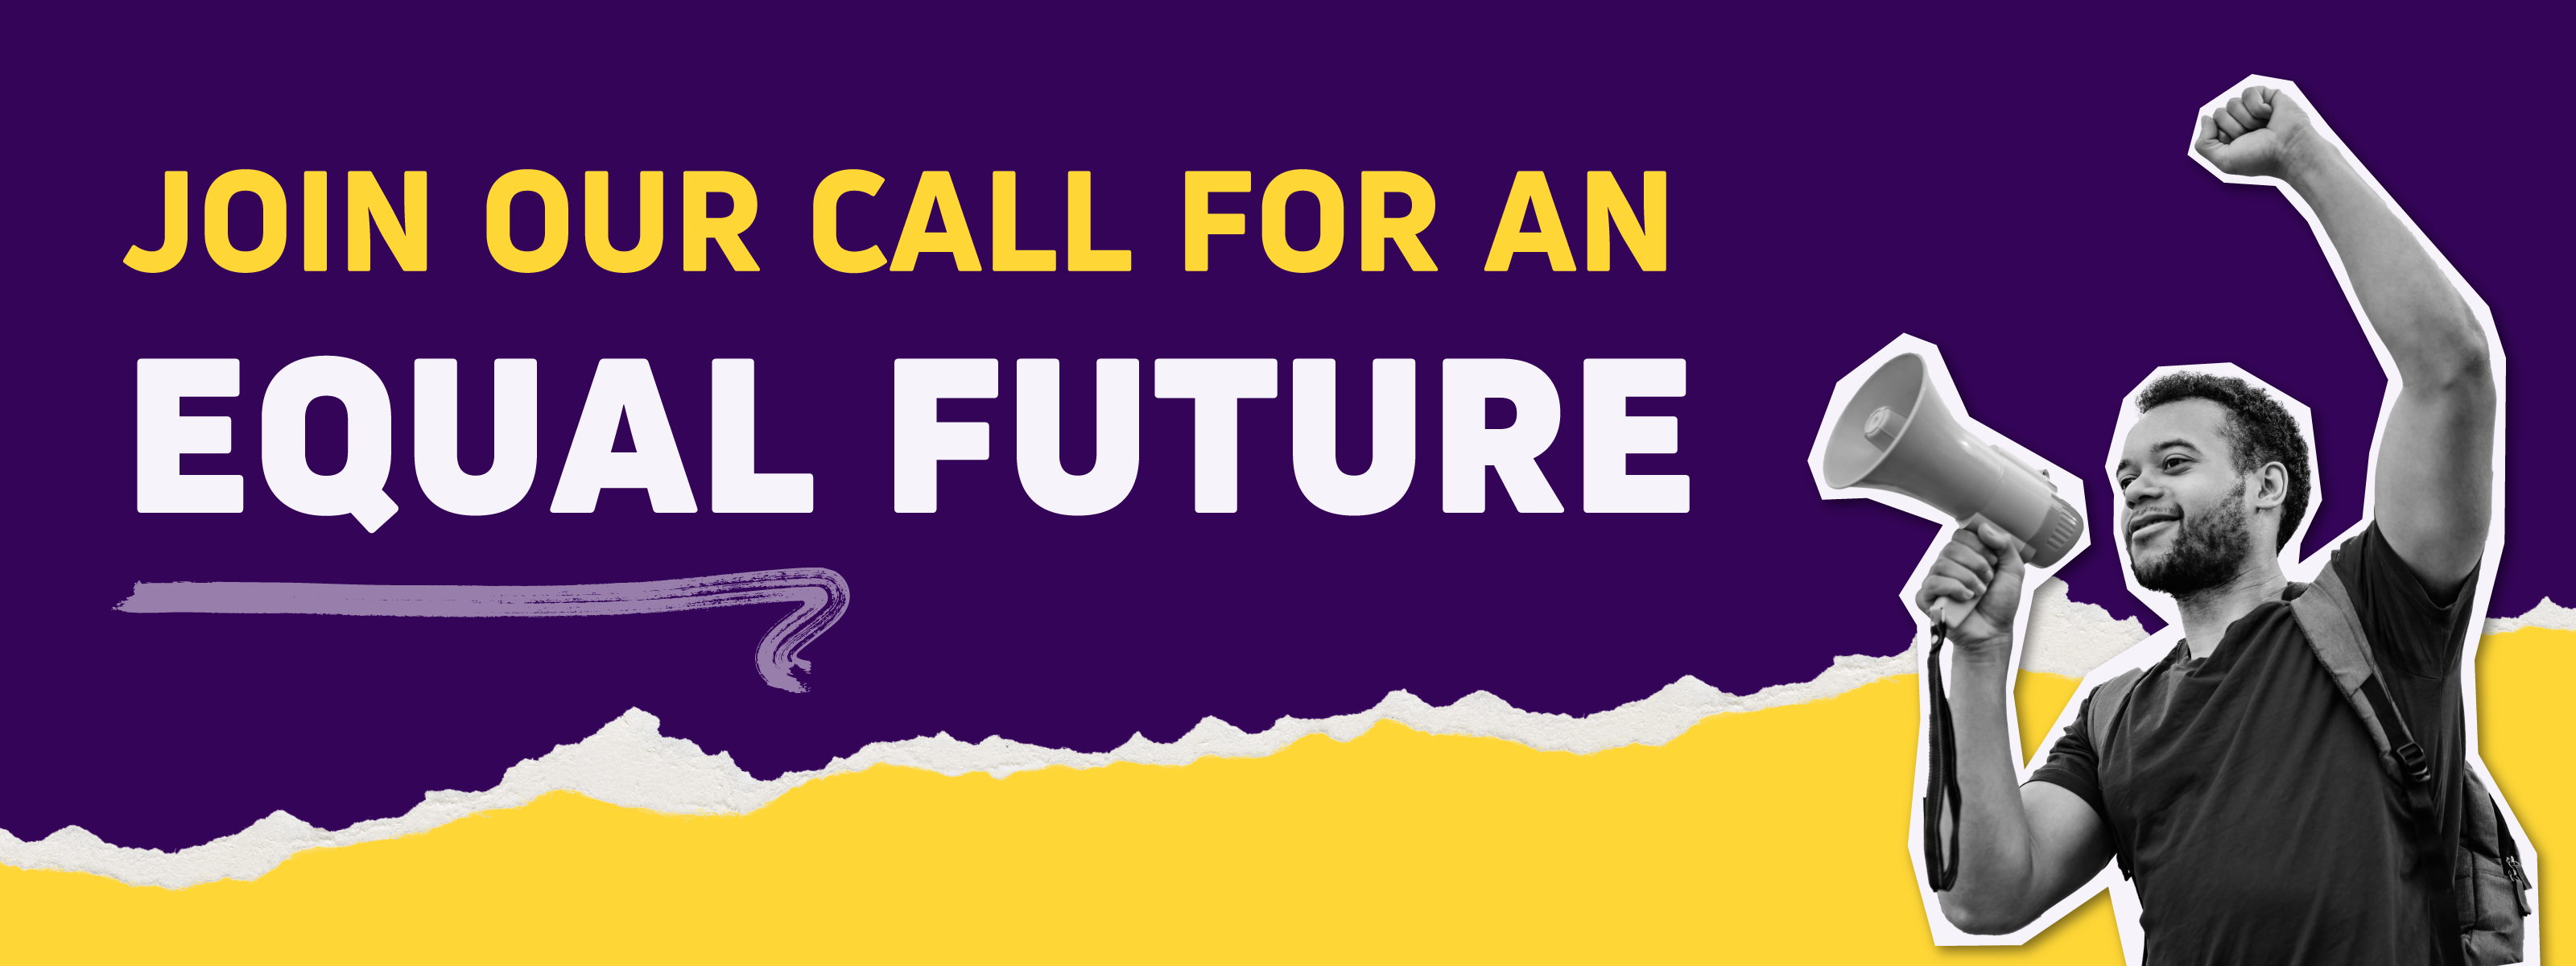 "Join our call for an equal future". To the right there is a black and white picture of a man raising his left fist, holding a megaphone in the other hand. 